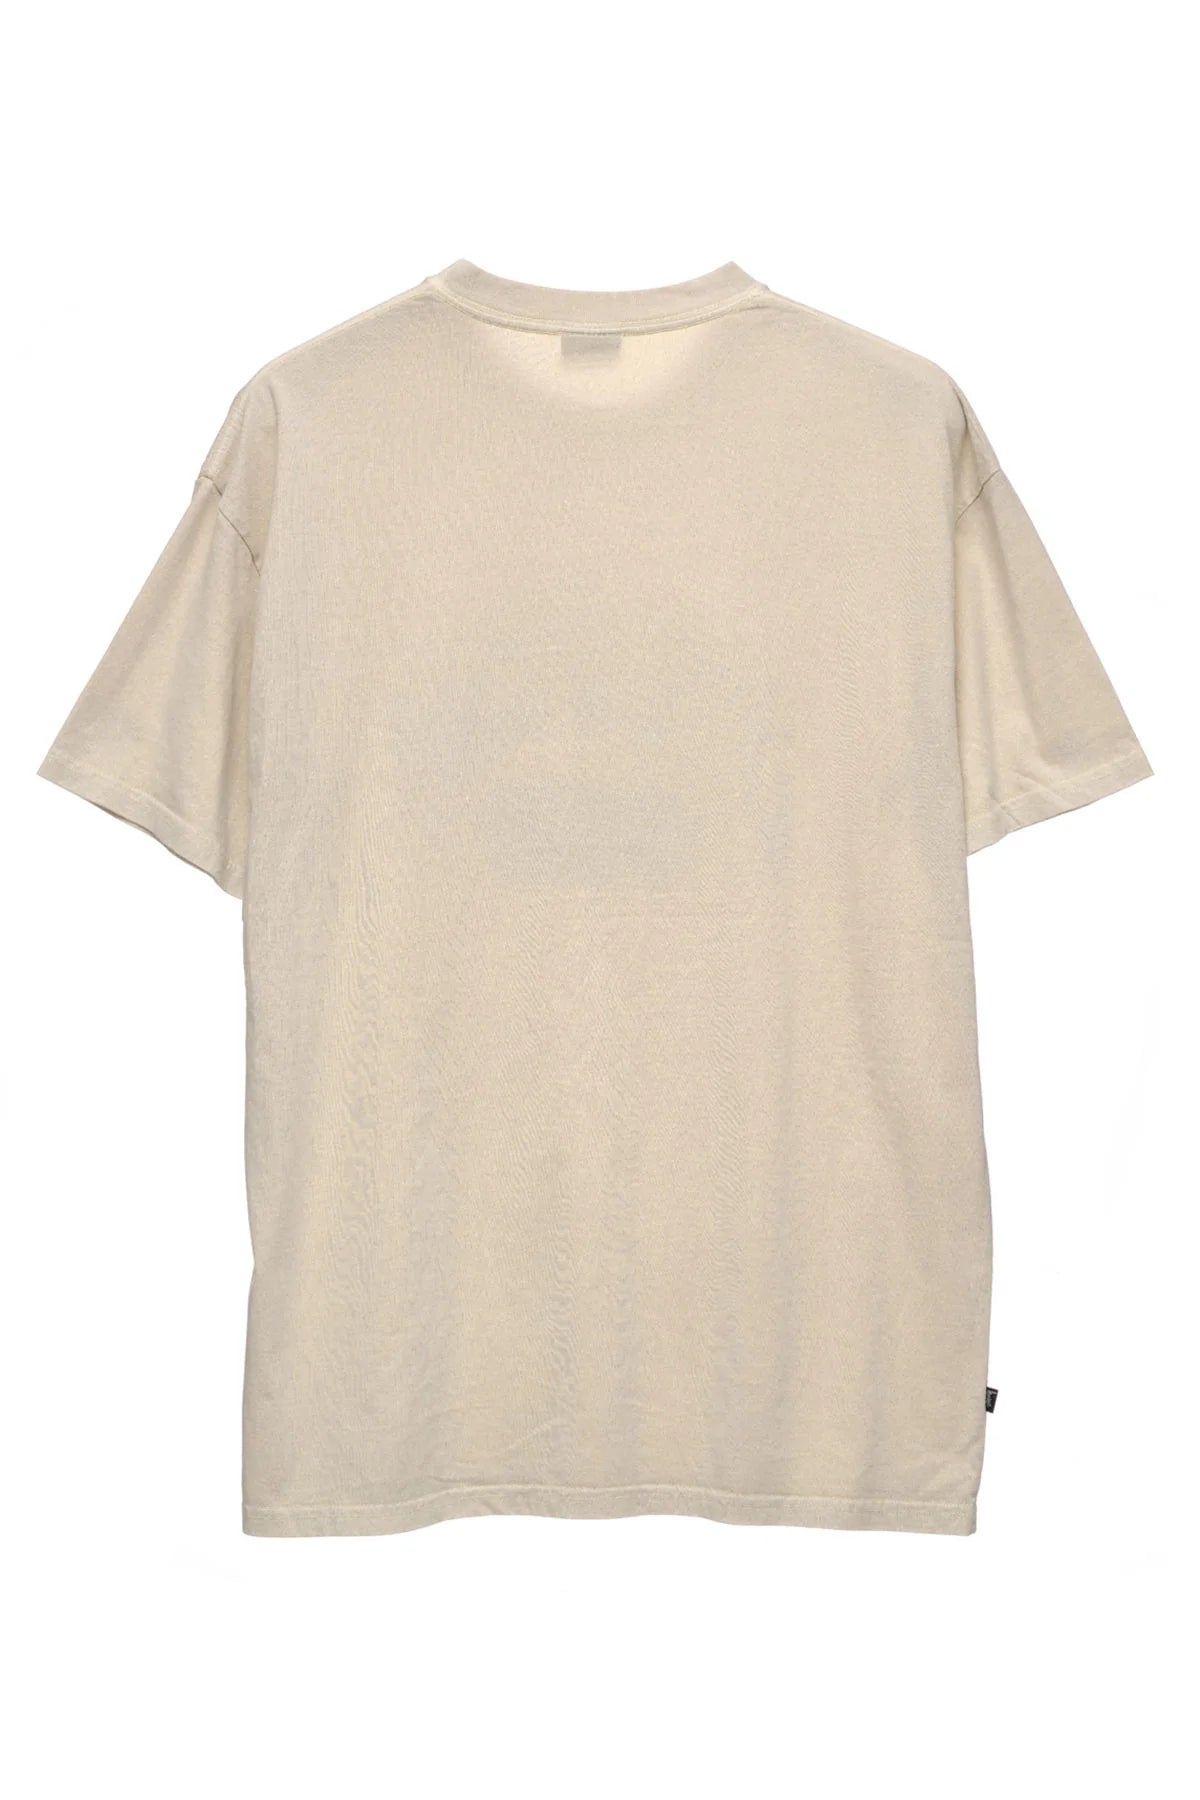 STUSSY Crew SS Mens Tee - Pigment Natural